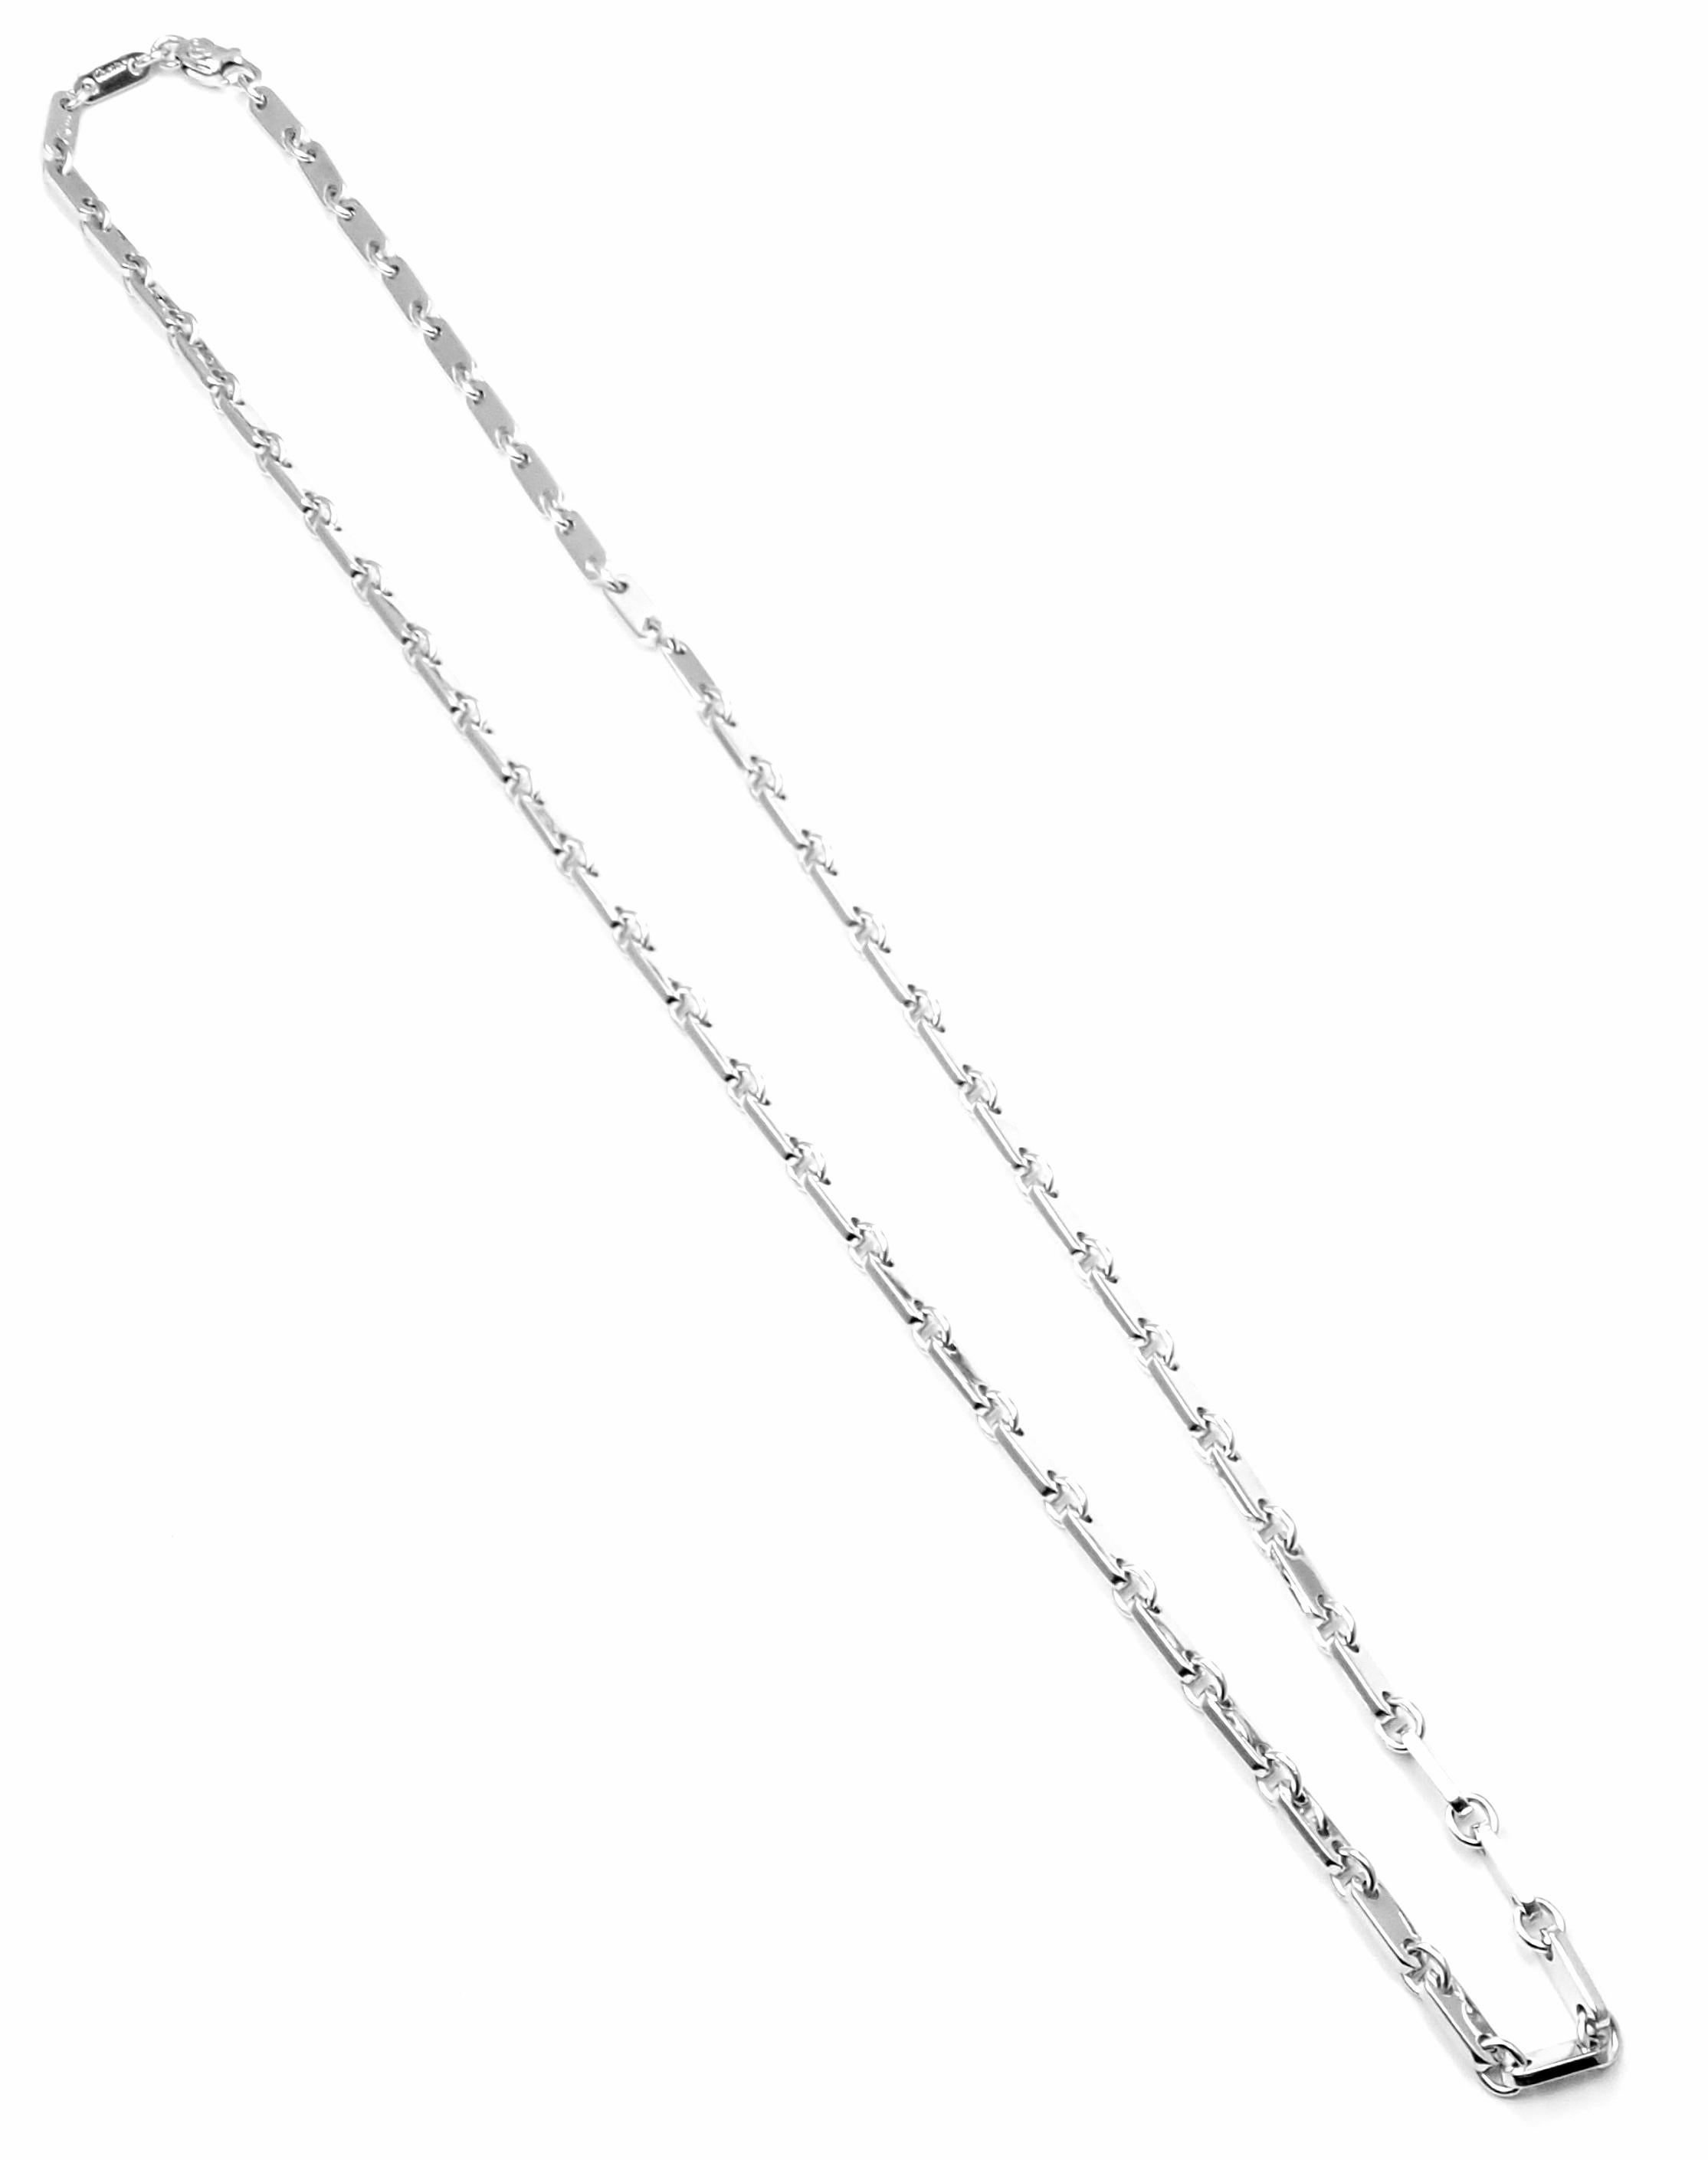 Cartier Link White Gold Chain Necklace, 1998 2